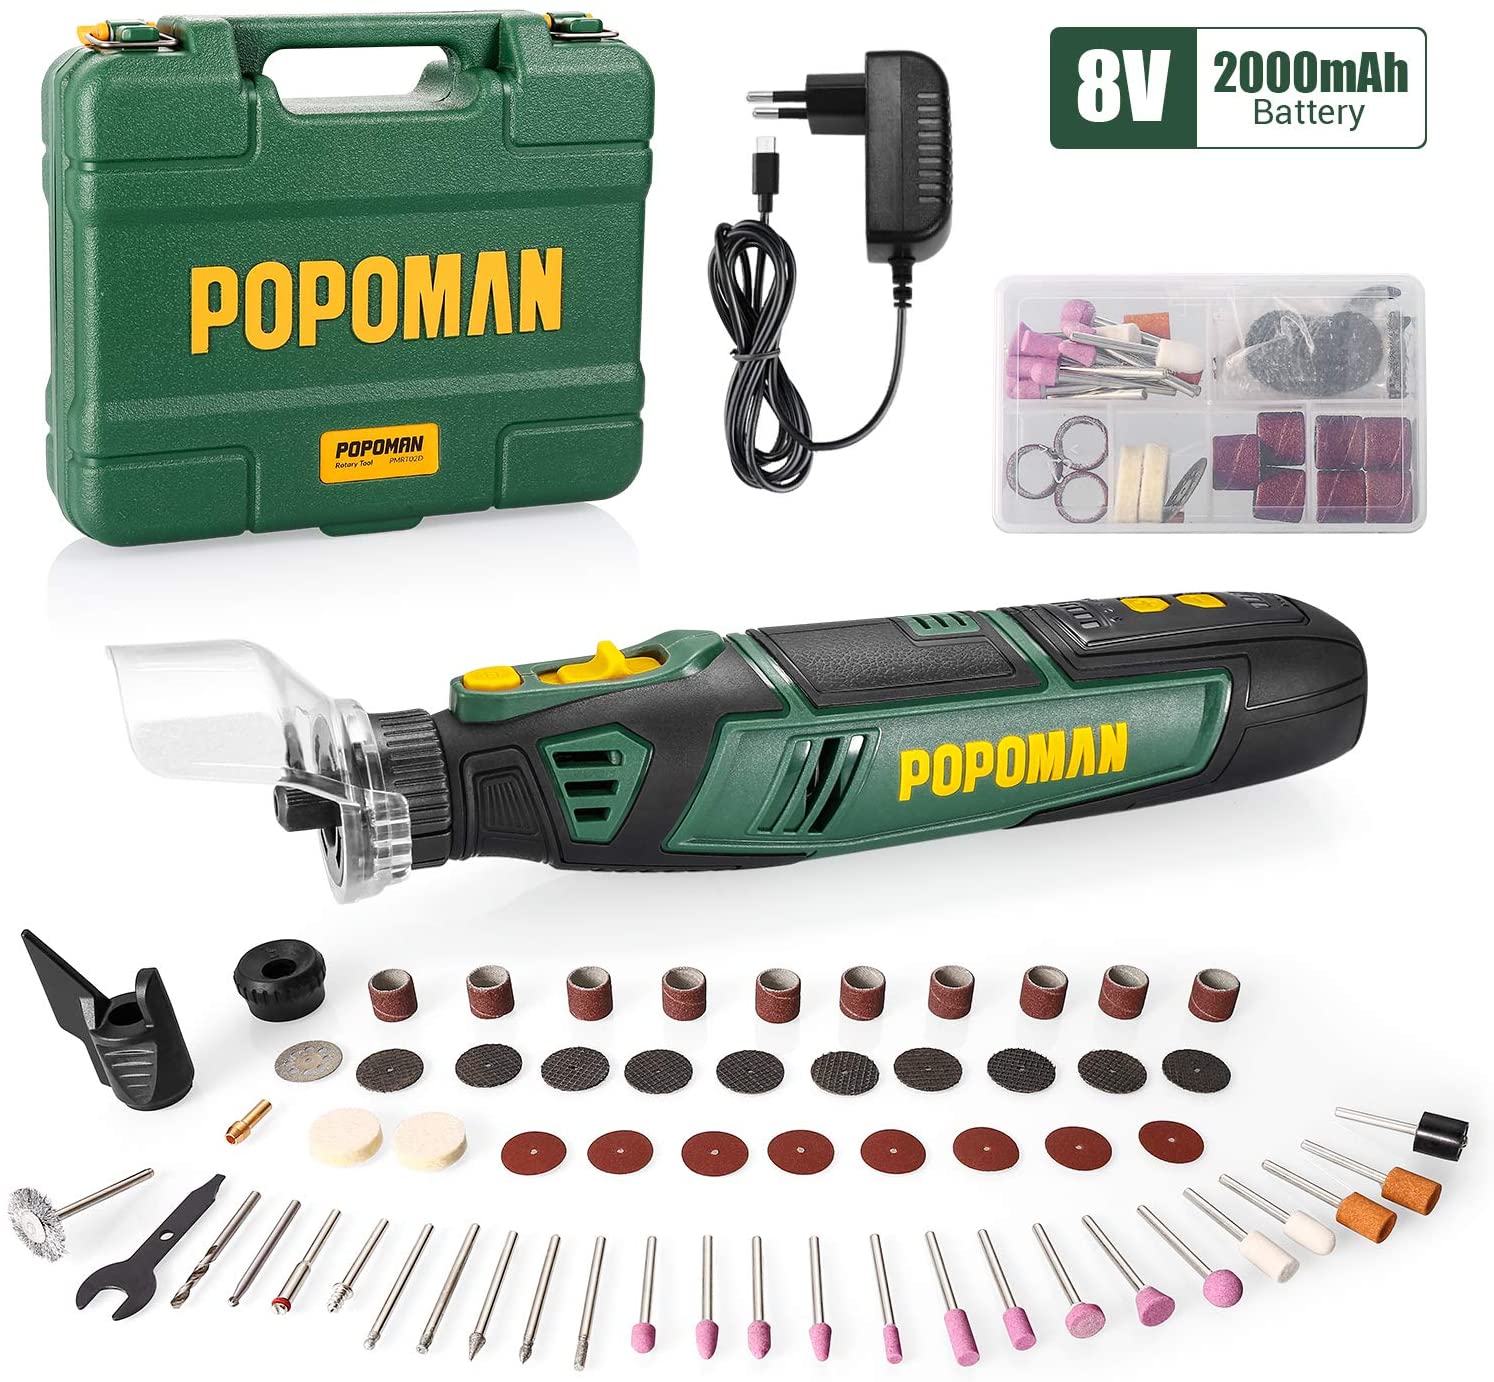 POPOMAN Cordless Rotary Tool Kit, POPOMAN 8V 2.0Ah Li-ion Battery, USB-C  Cable Charger, Variable Speed, 58pcs Accessories for Carving, Engraving